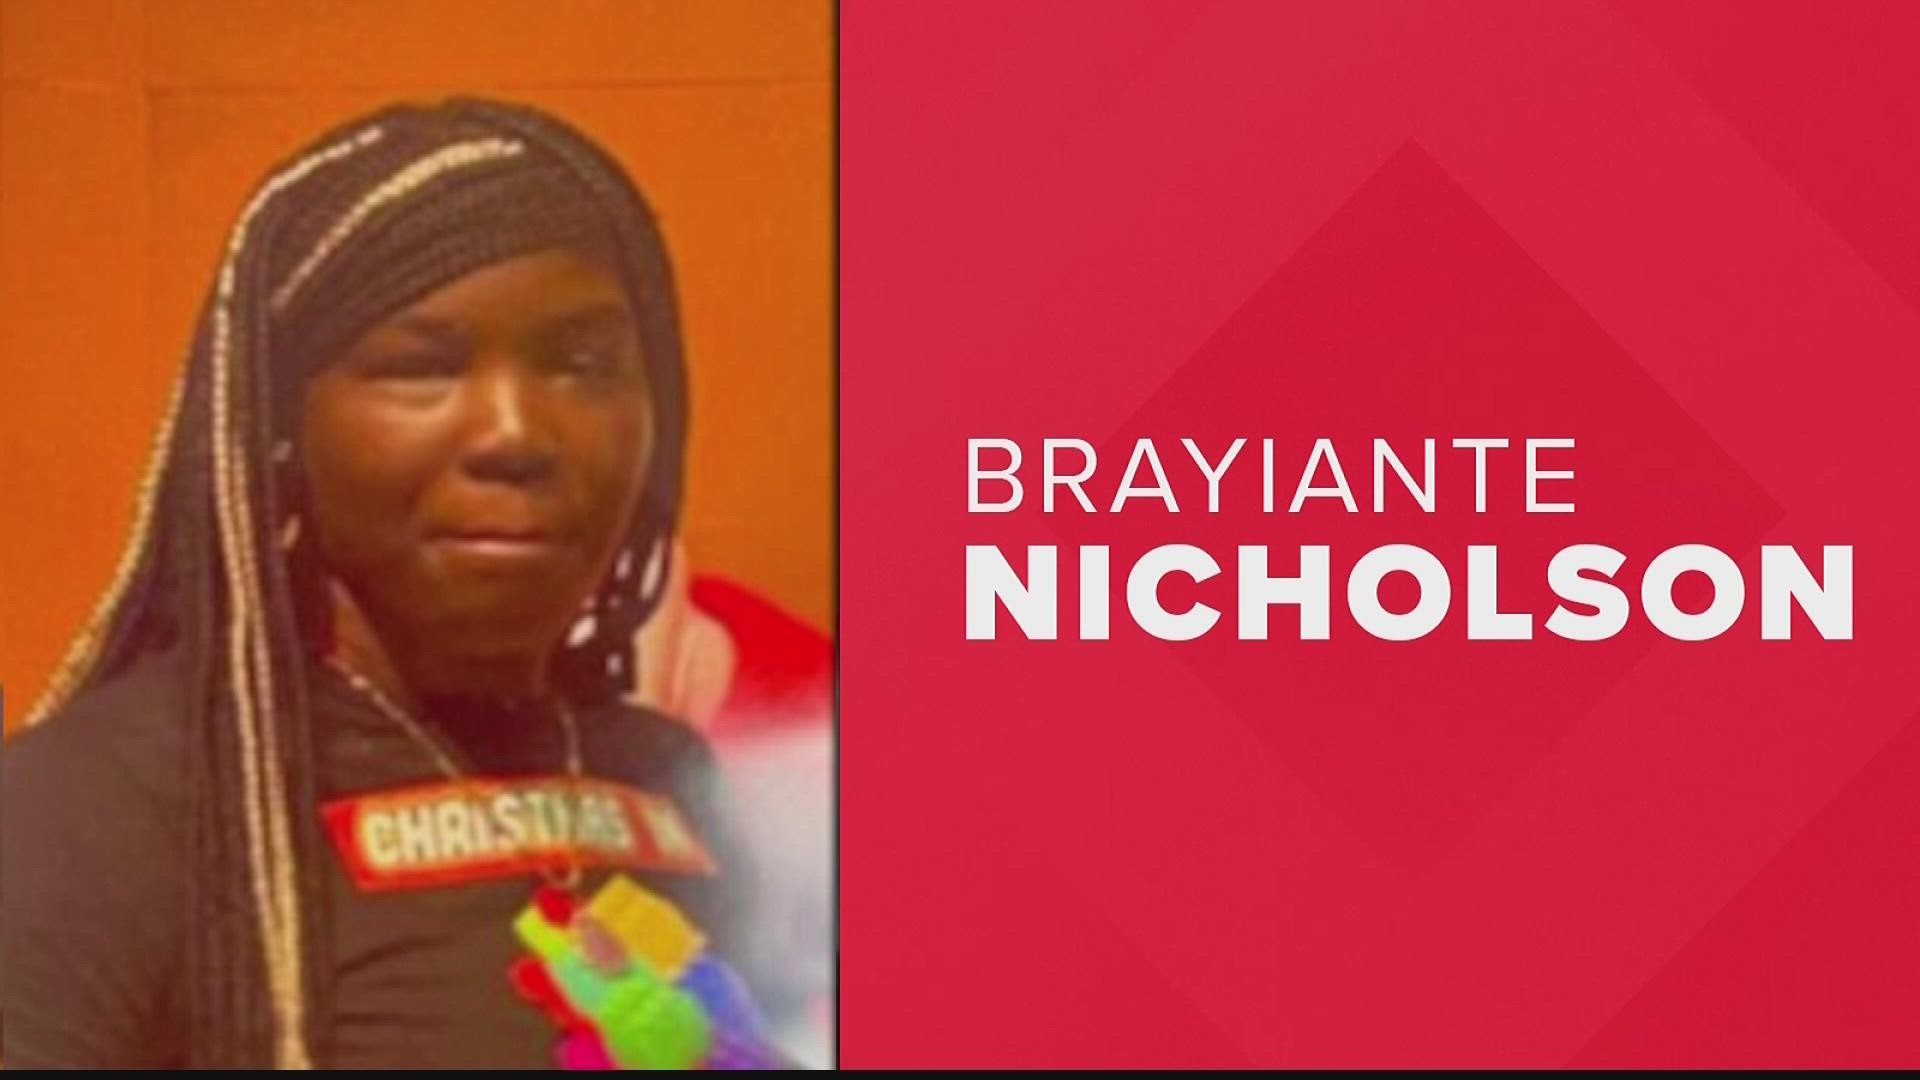 Brayiante Nicholson has been reported missing after never returning home from her shift at an Atlanta Chick-fil-A, the Clayton County Police Department said.